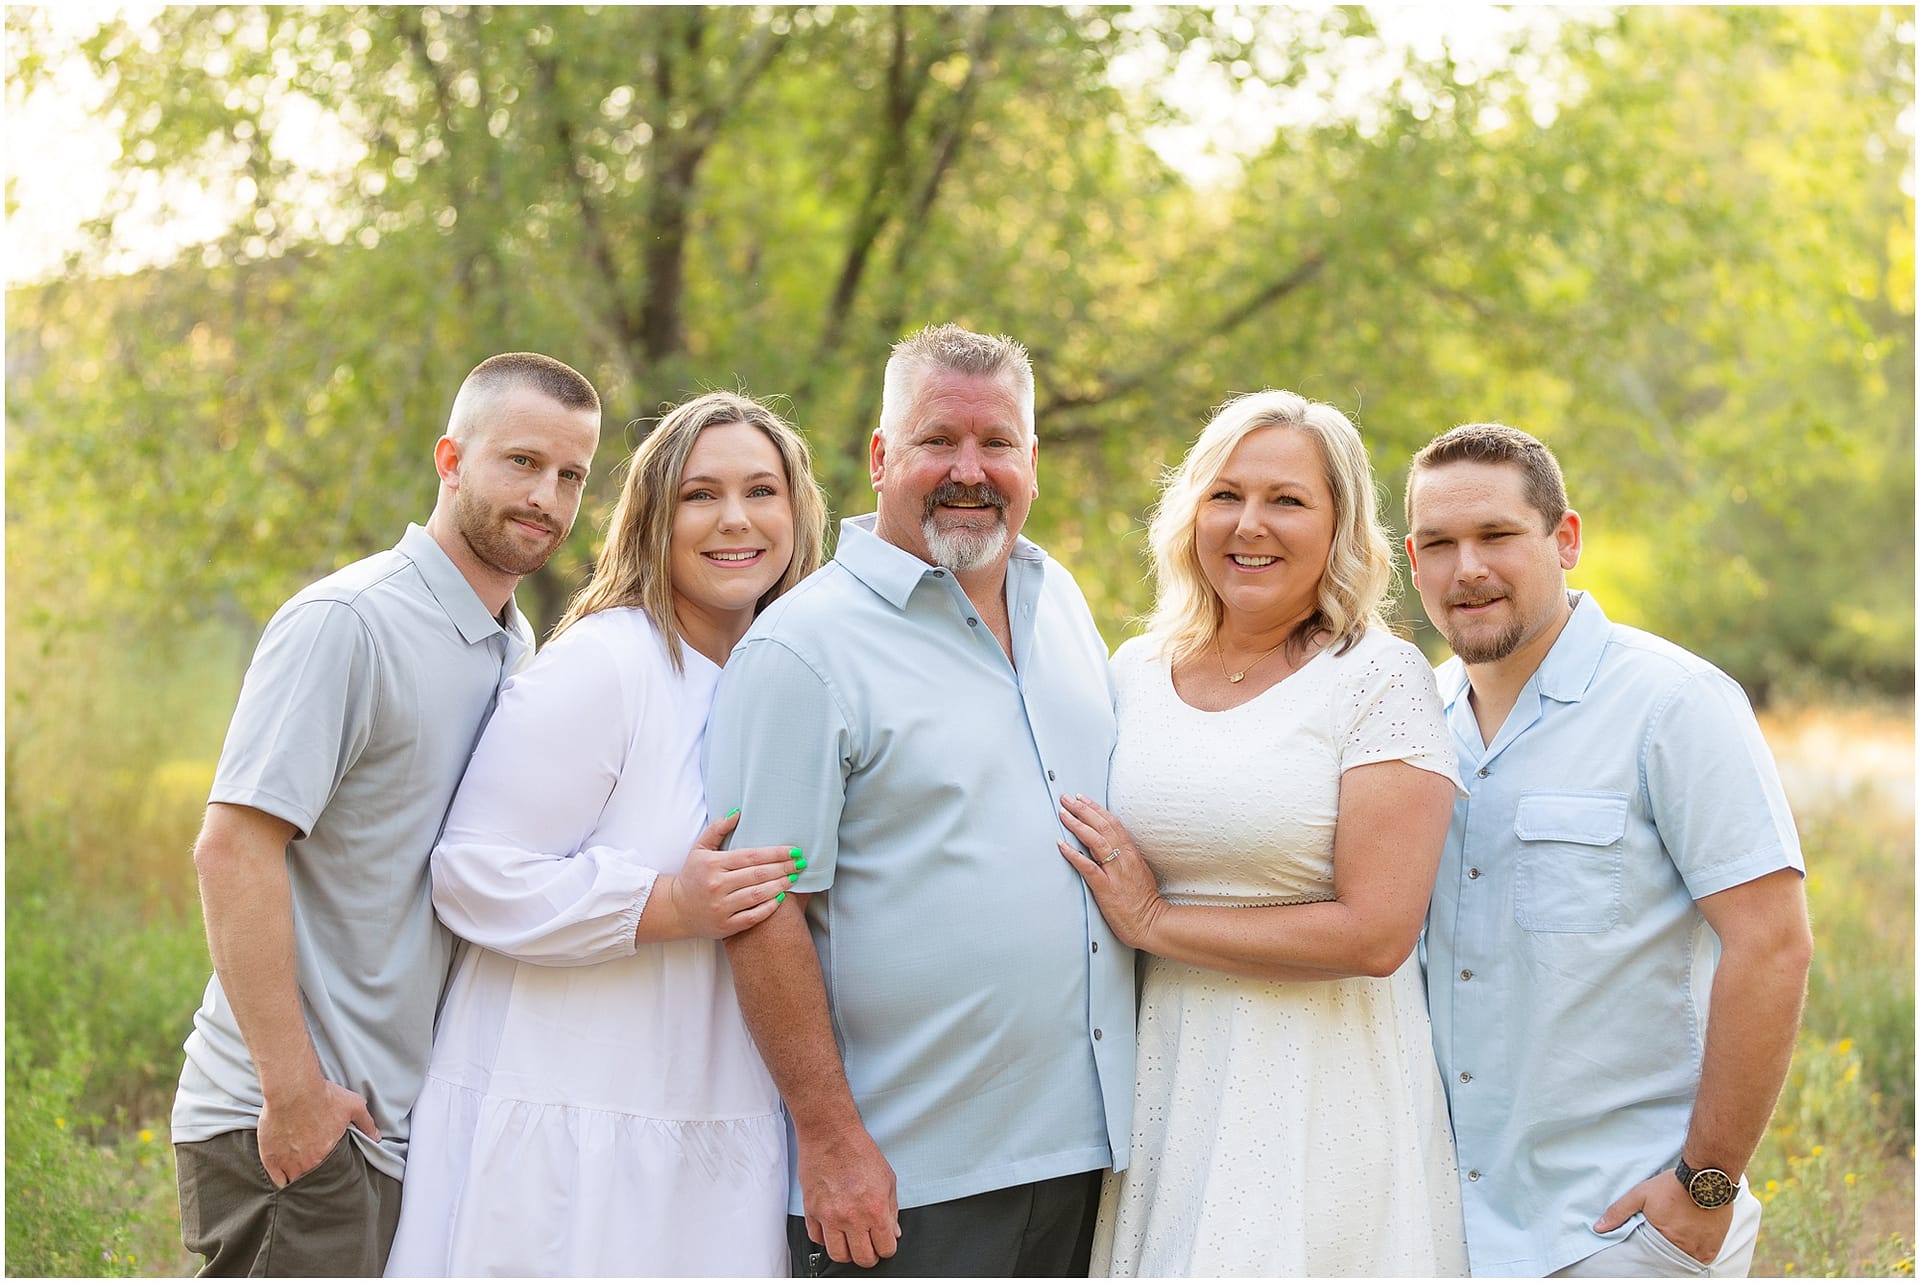 Family of five takes Boise family portrait. Photo by Tiffany Hix Photography.